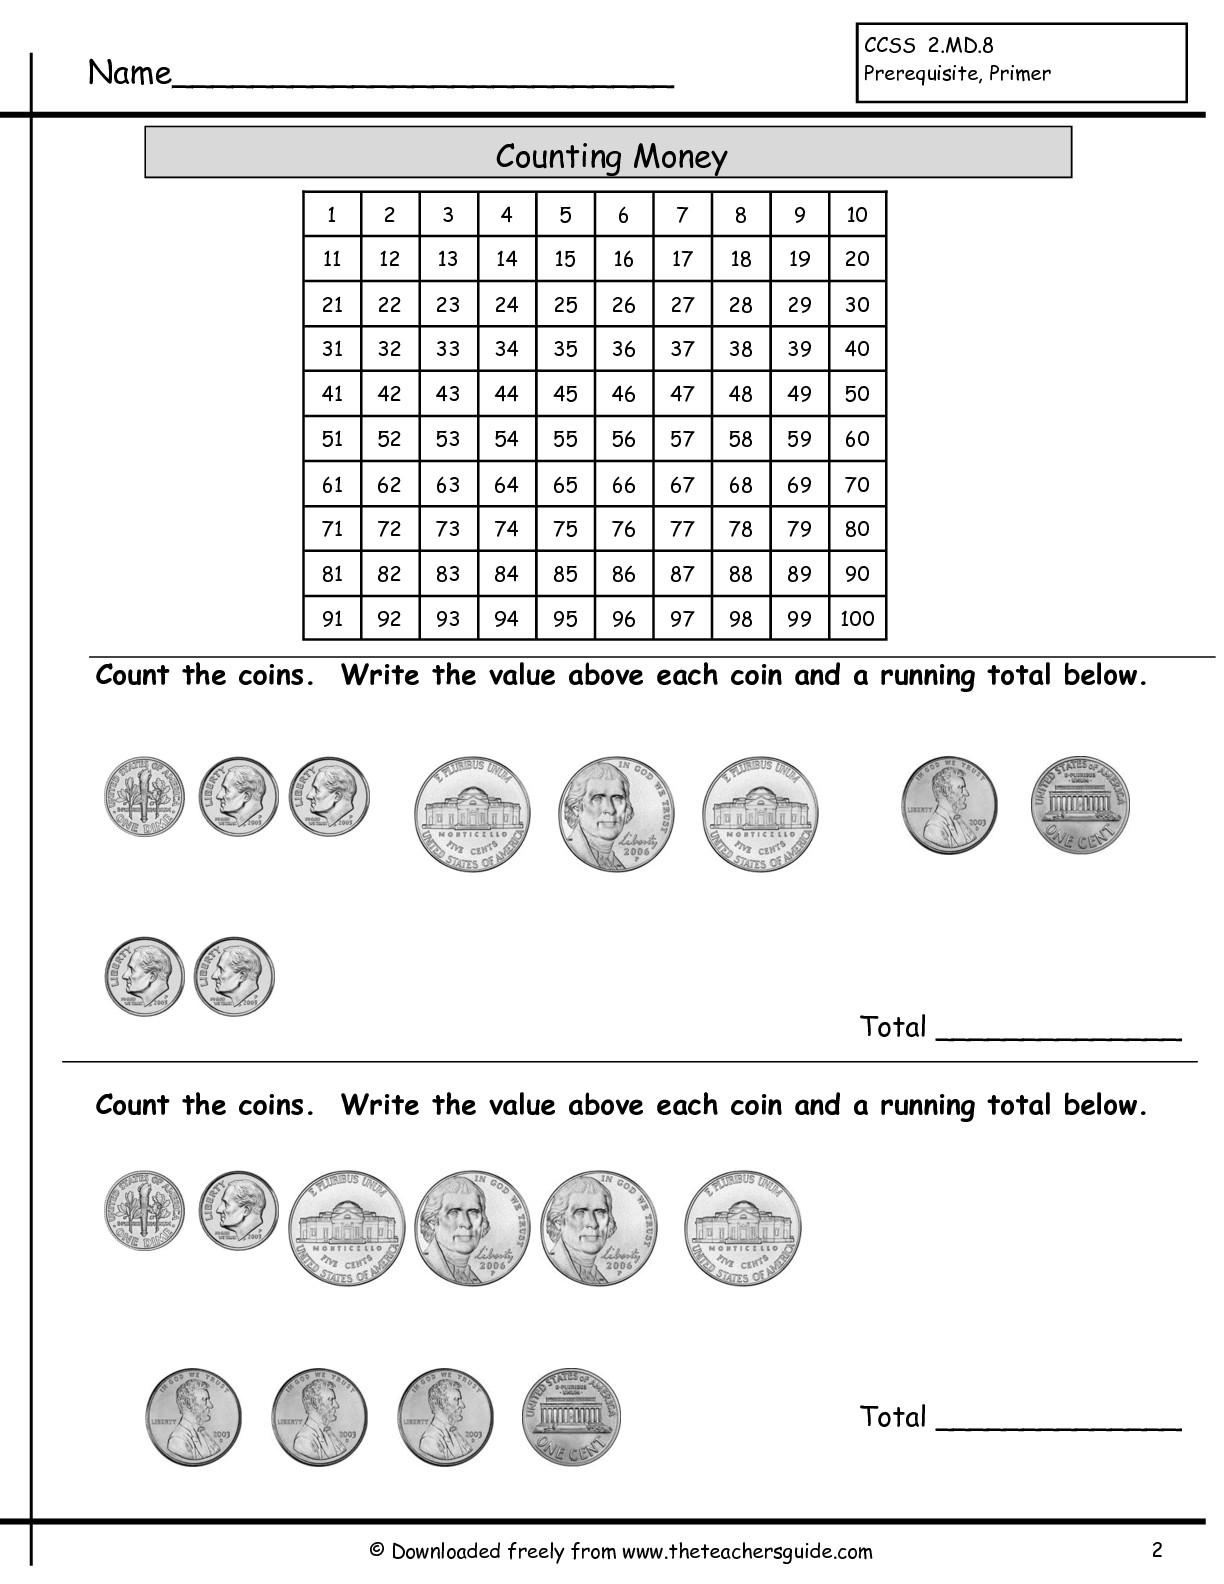 13 Best Images of Skip Counting Money Worksheets - 2nd ...